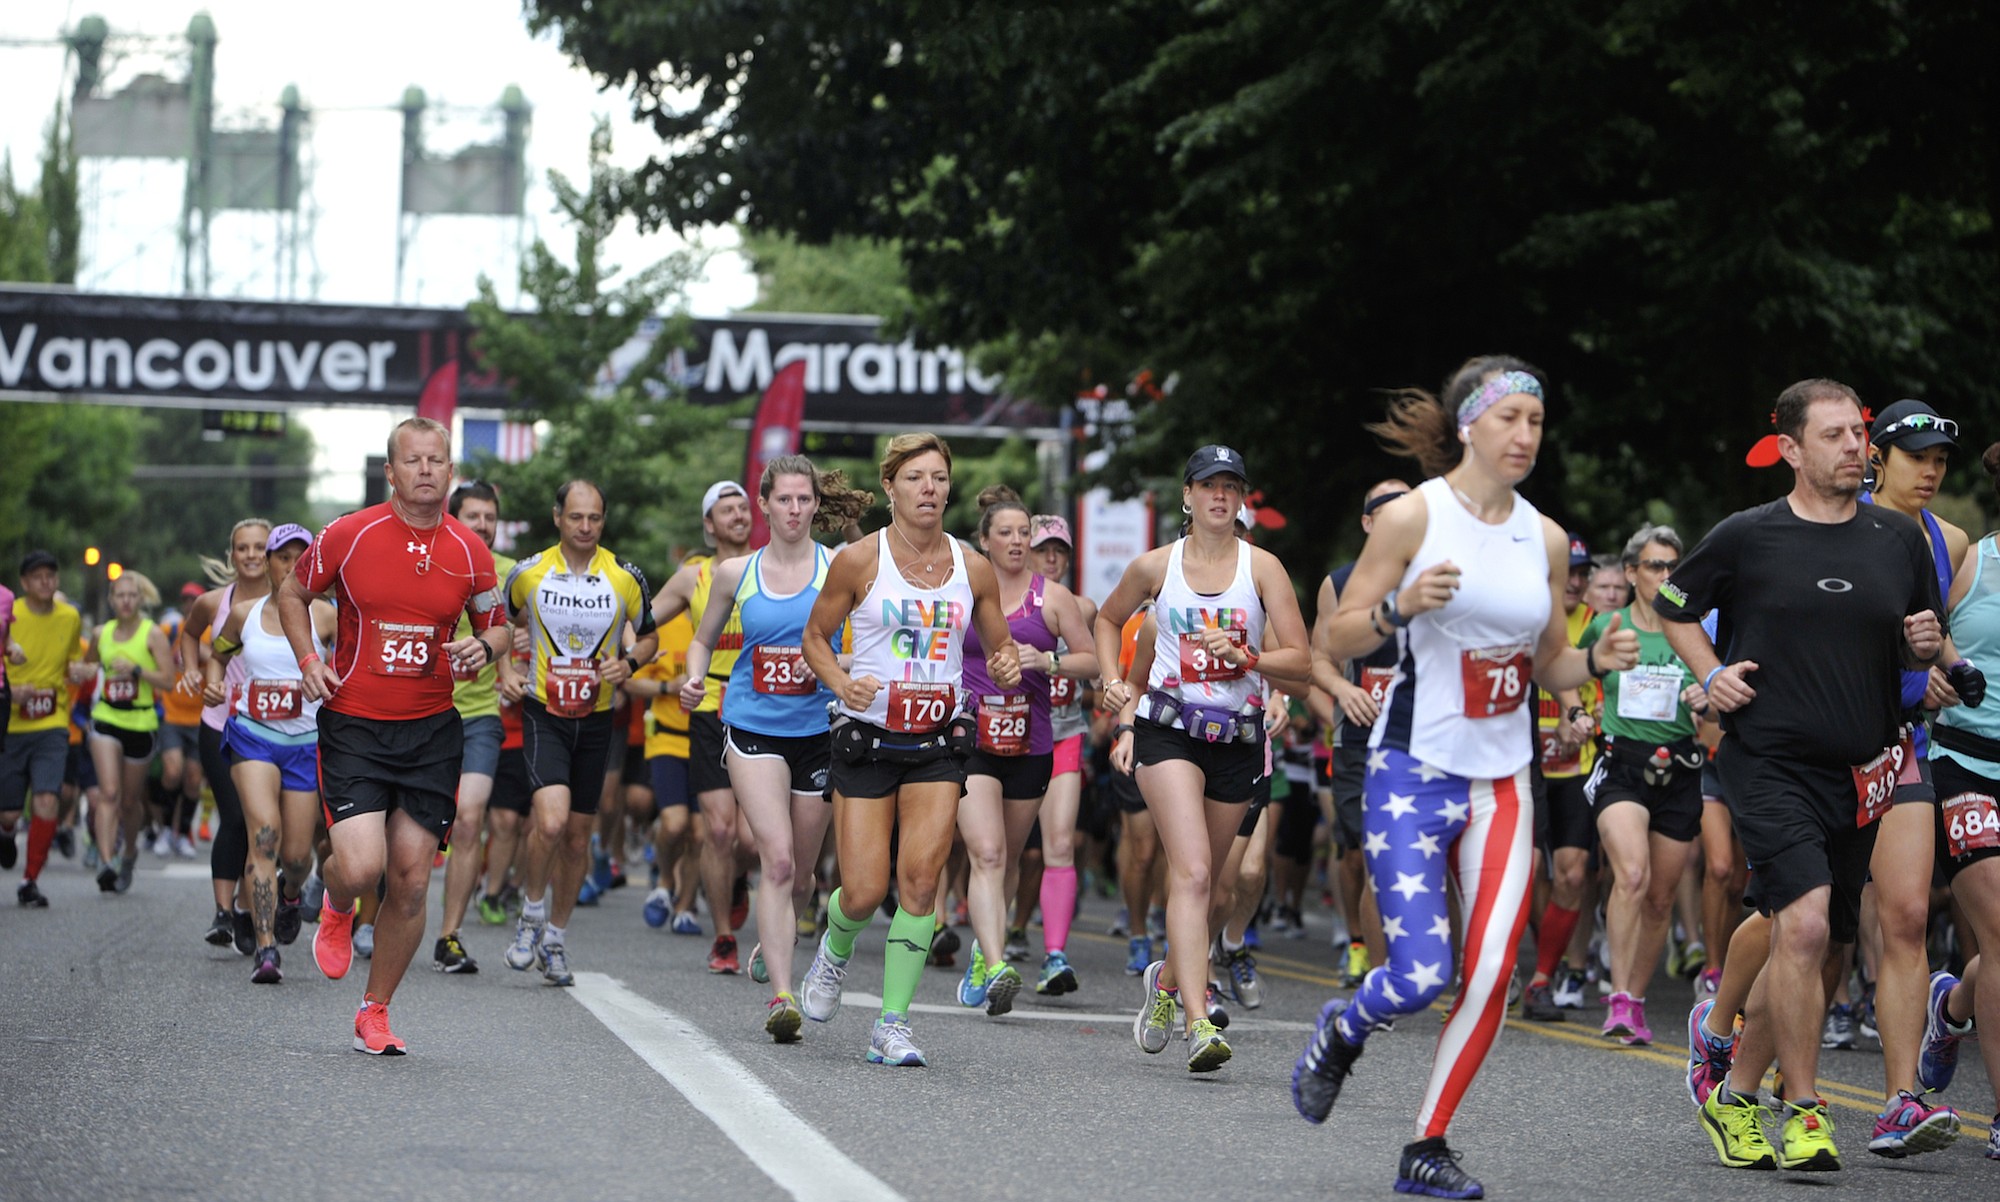 Runners start the Vancouver USA Marathon at Esther Short Park in downtown Vancouver, Wash., on Sunday June 21, 2015.